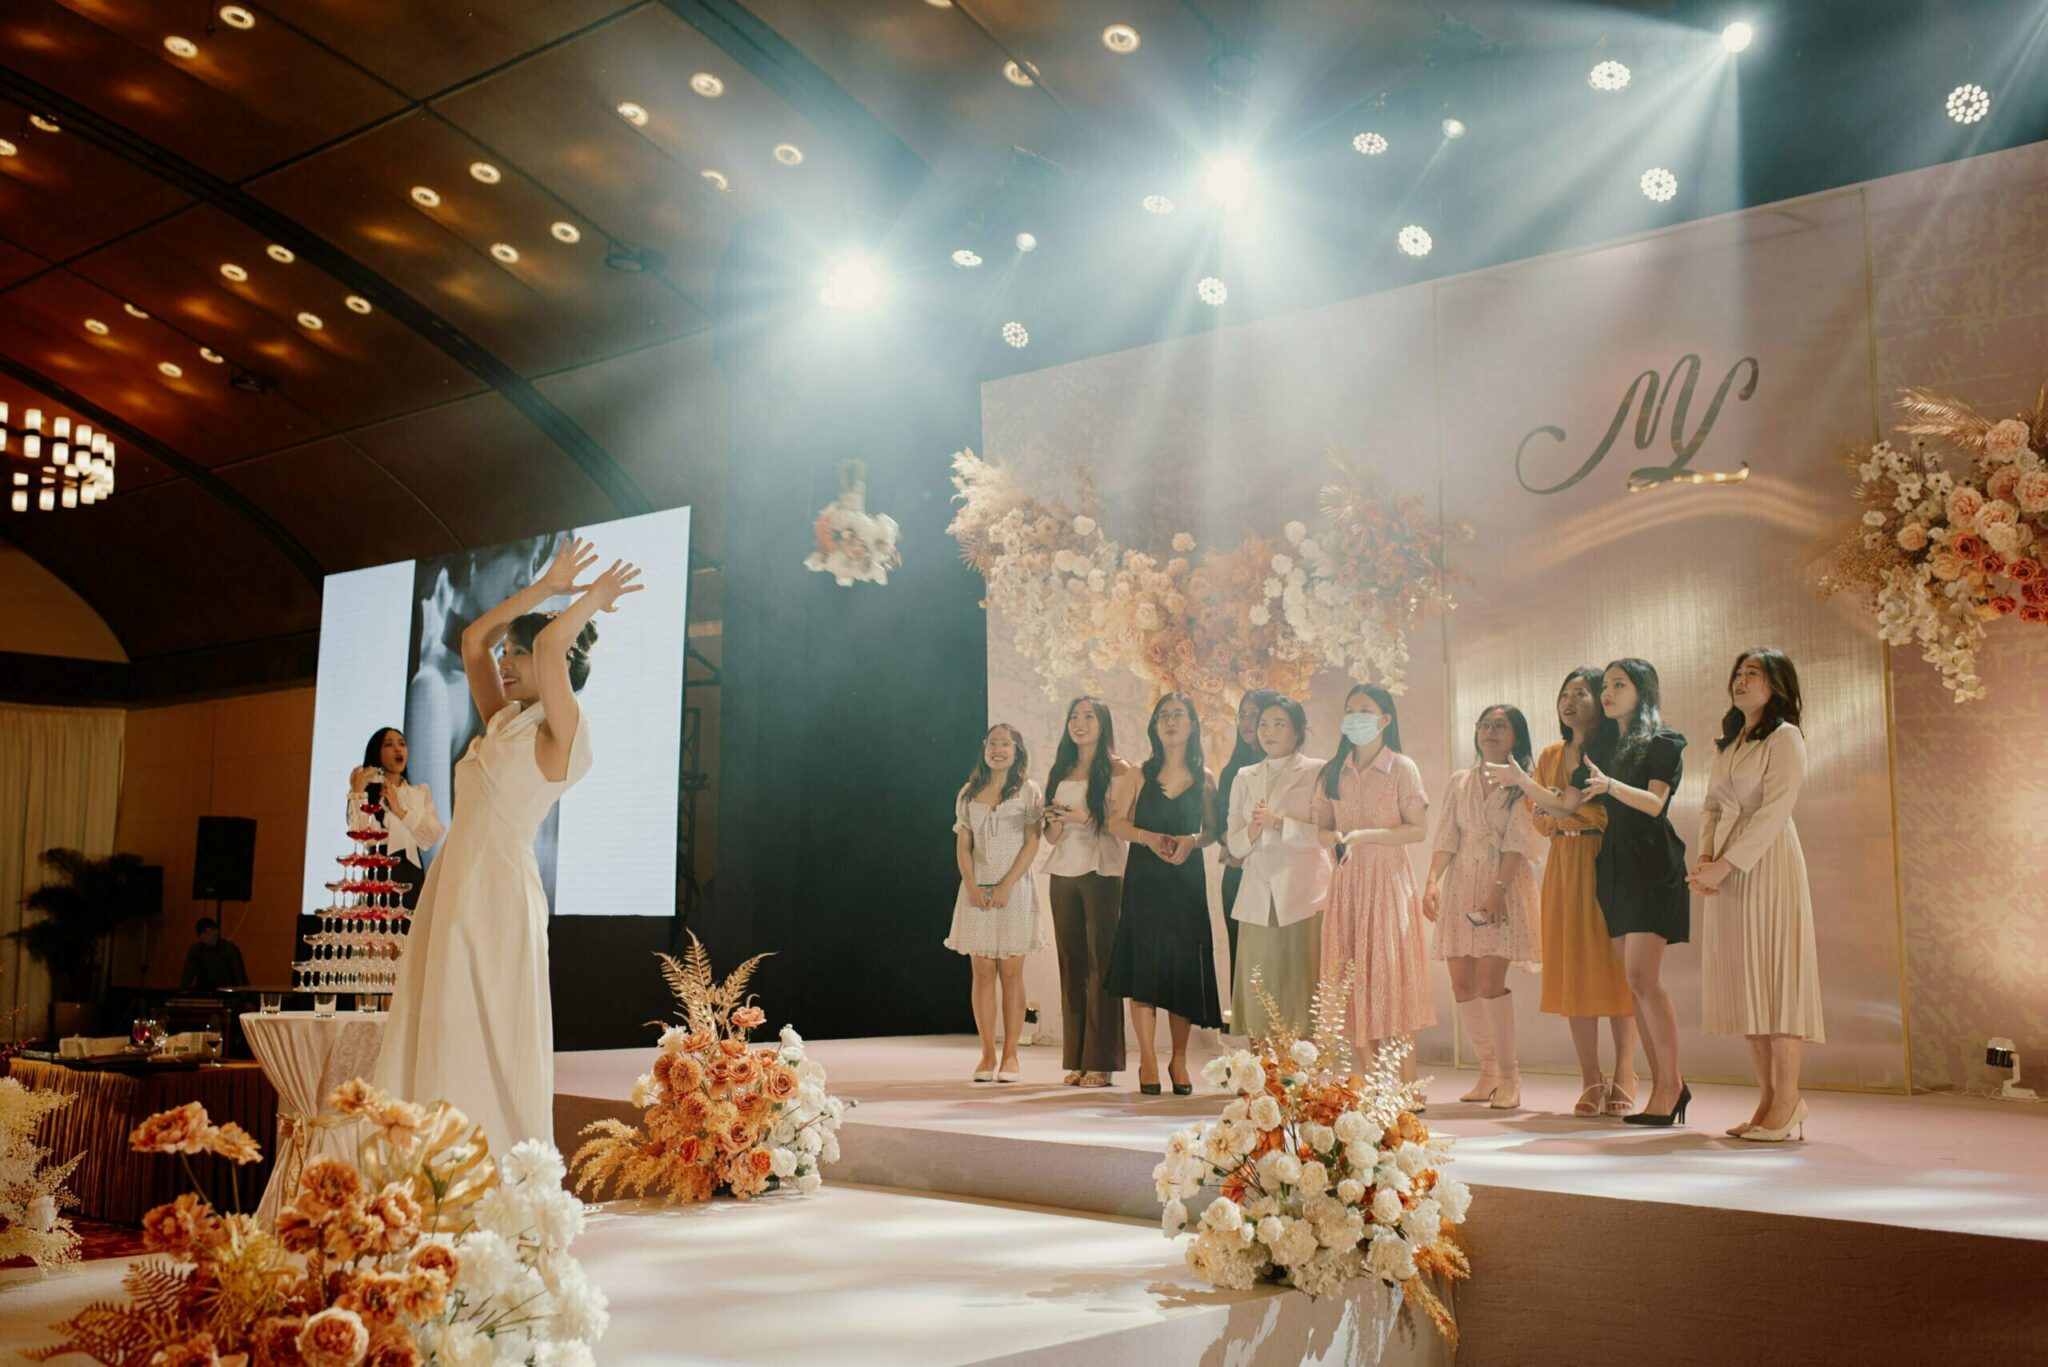 NCC Wedding Minh Linh 0141 scaled - The Planners